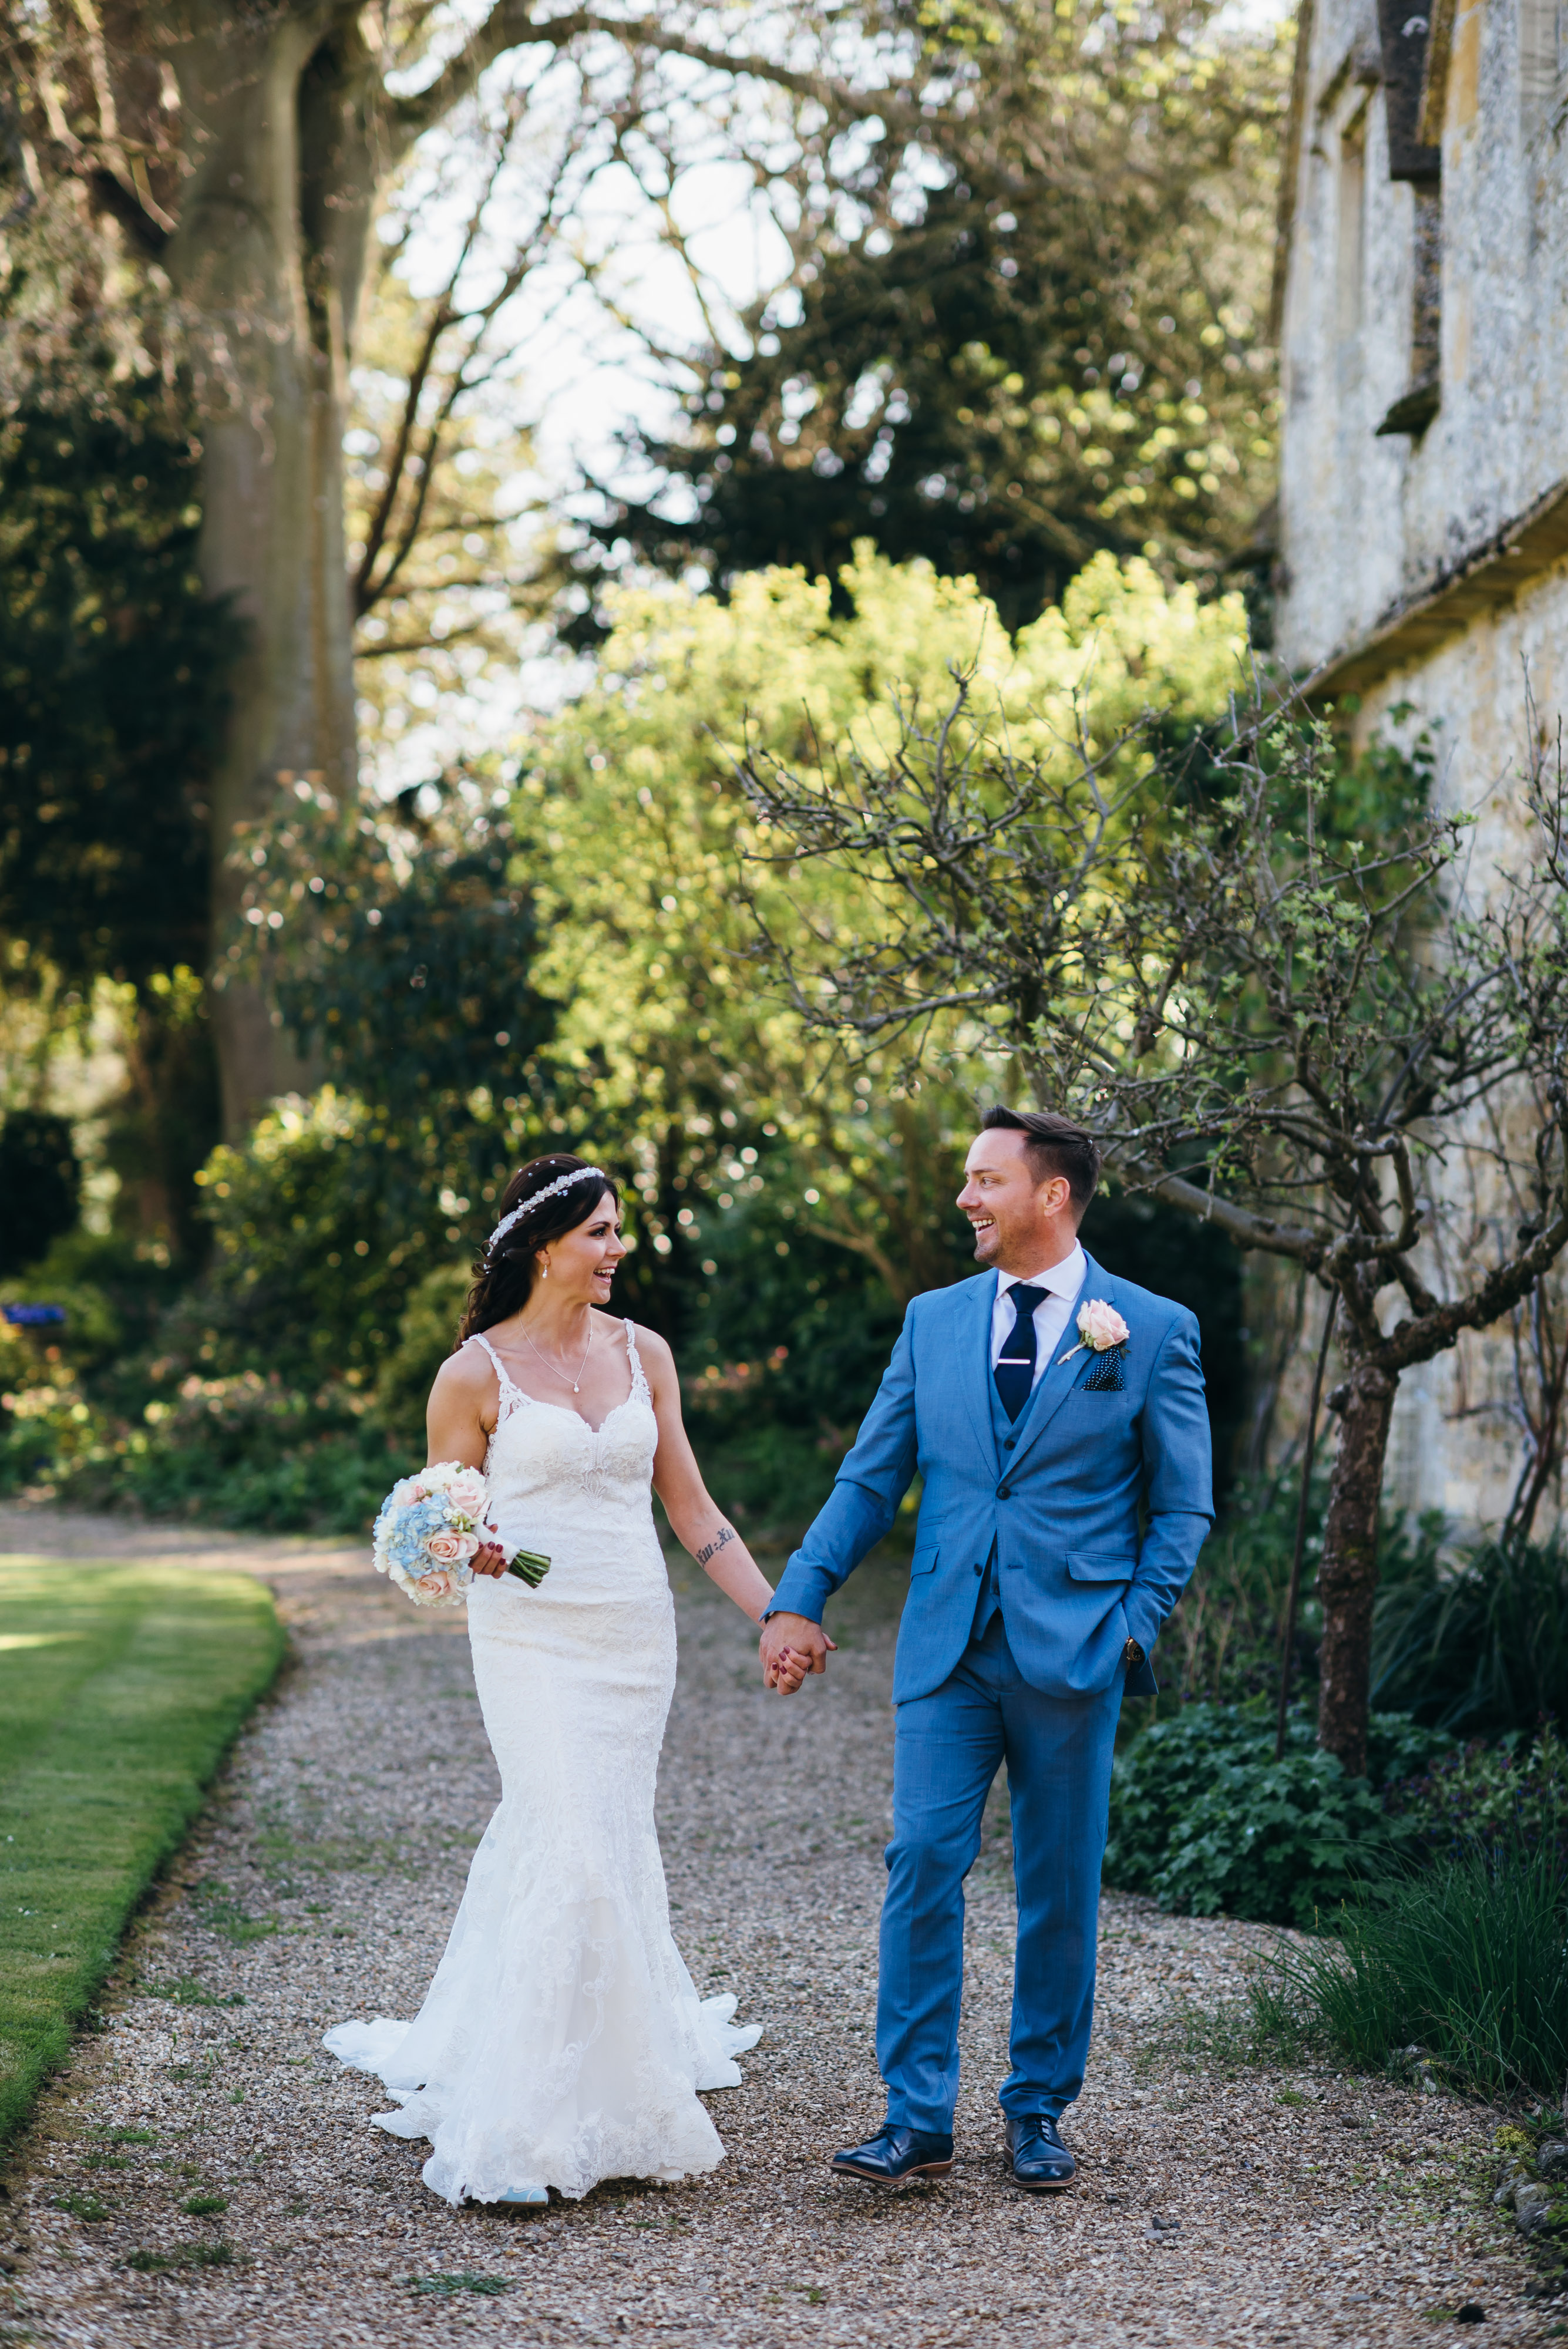 Slaughters Manor House wedding photographer  